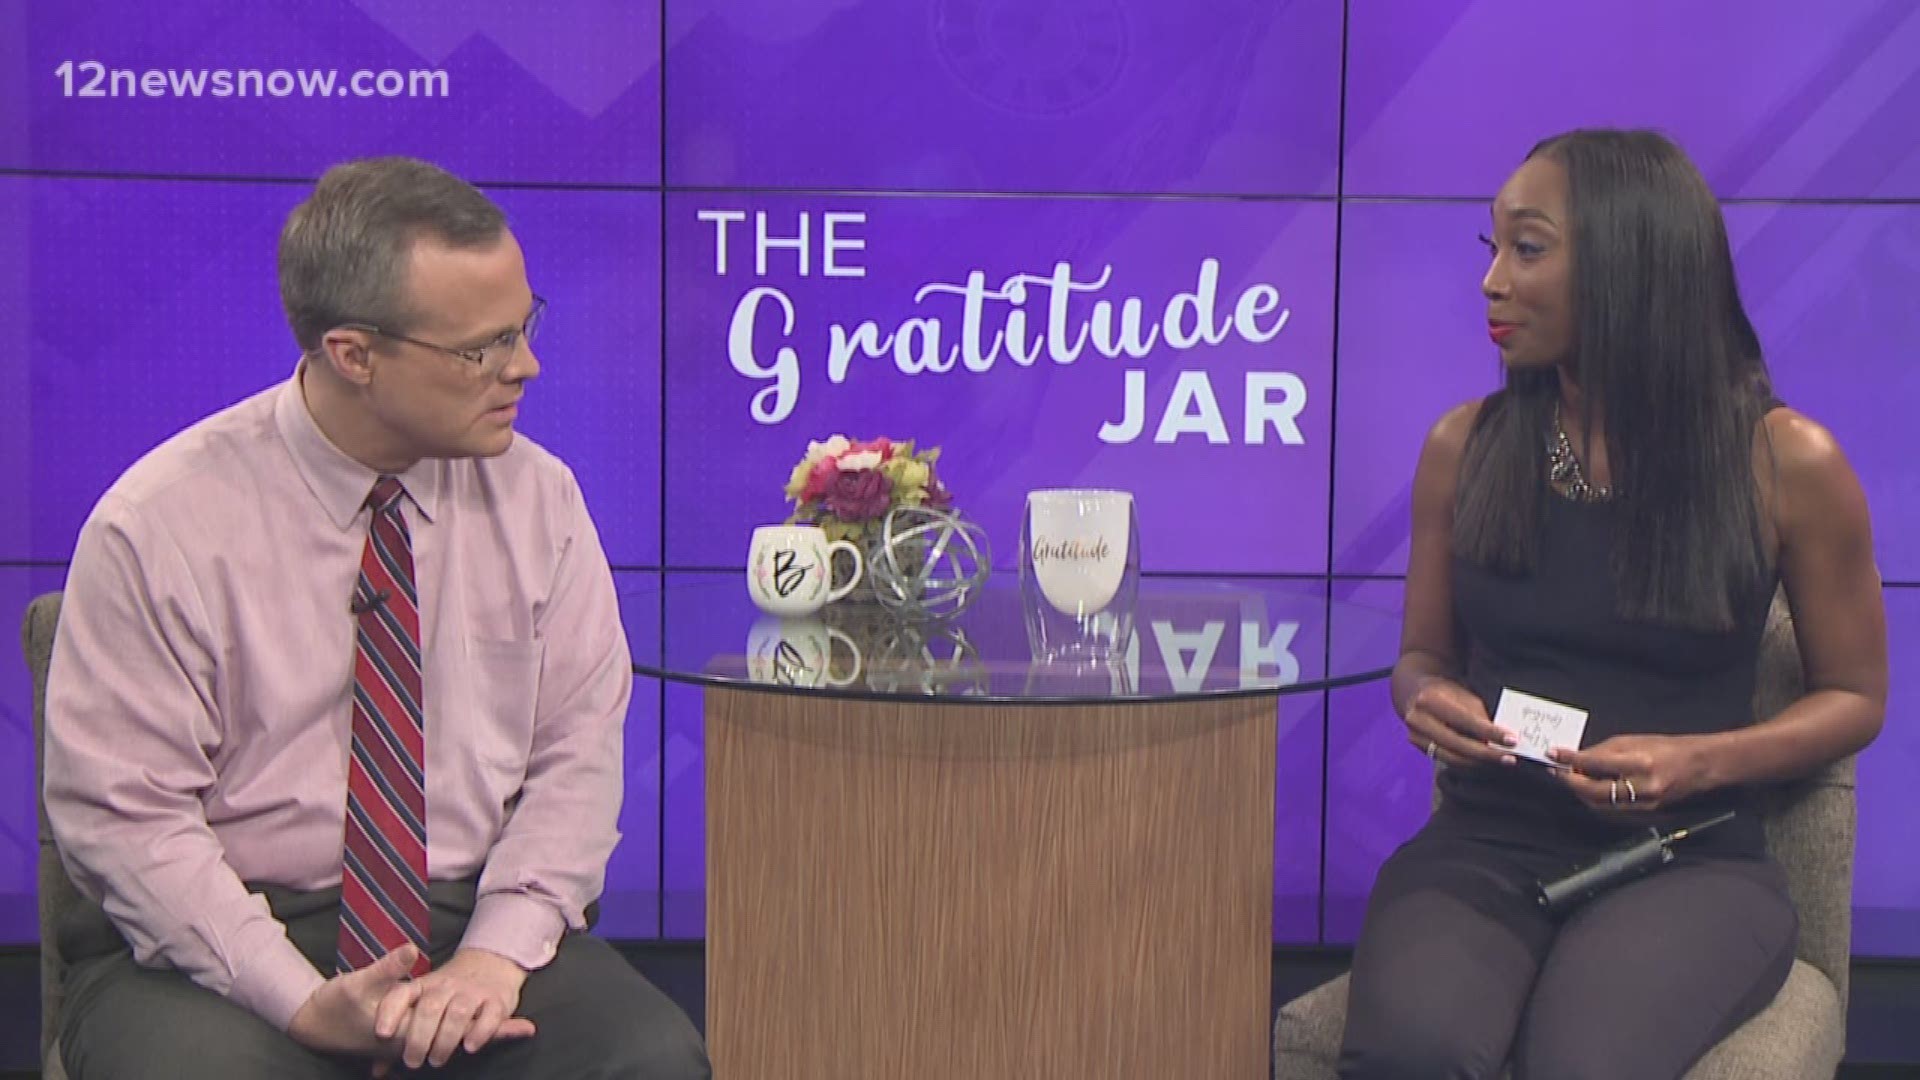 Let's take a look at the gratitude jar.